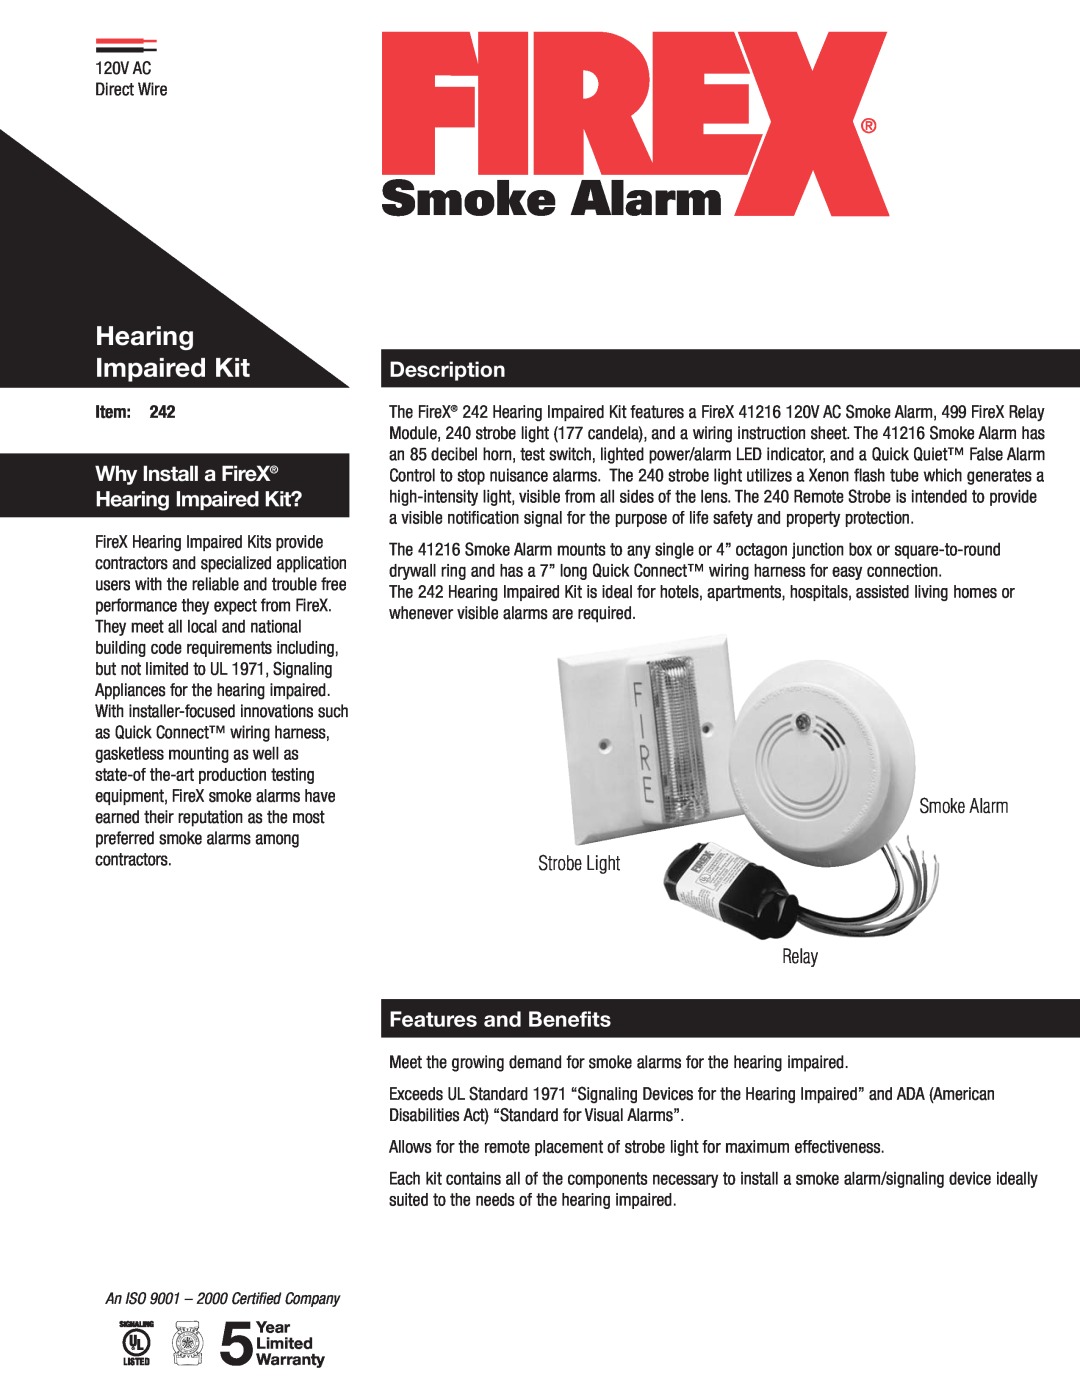 Firex 242 warranty Description, Features and Benefits, Hearing Impaired Kit, Smoke Alarm Strobe Light Relay 